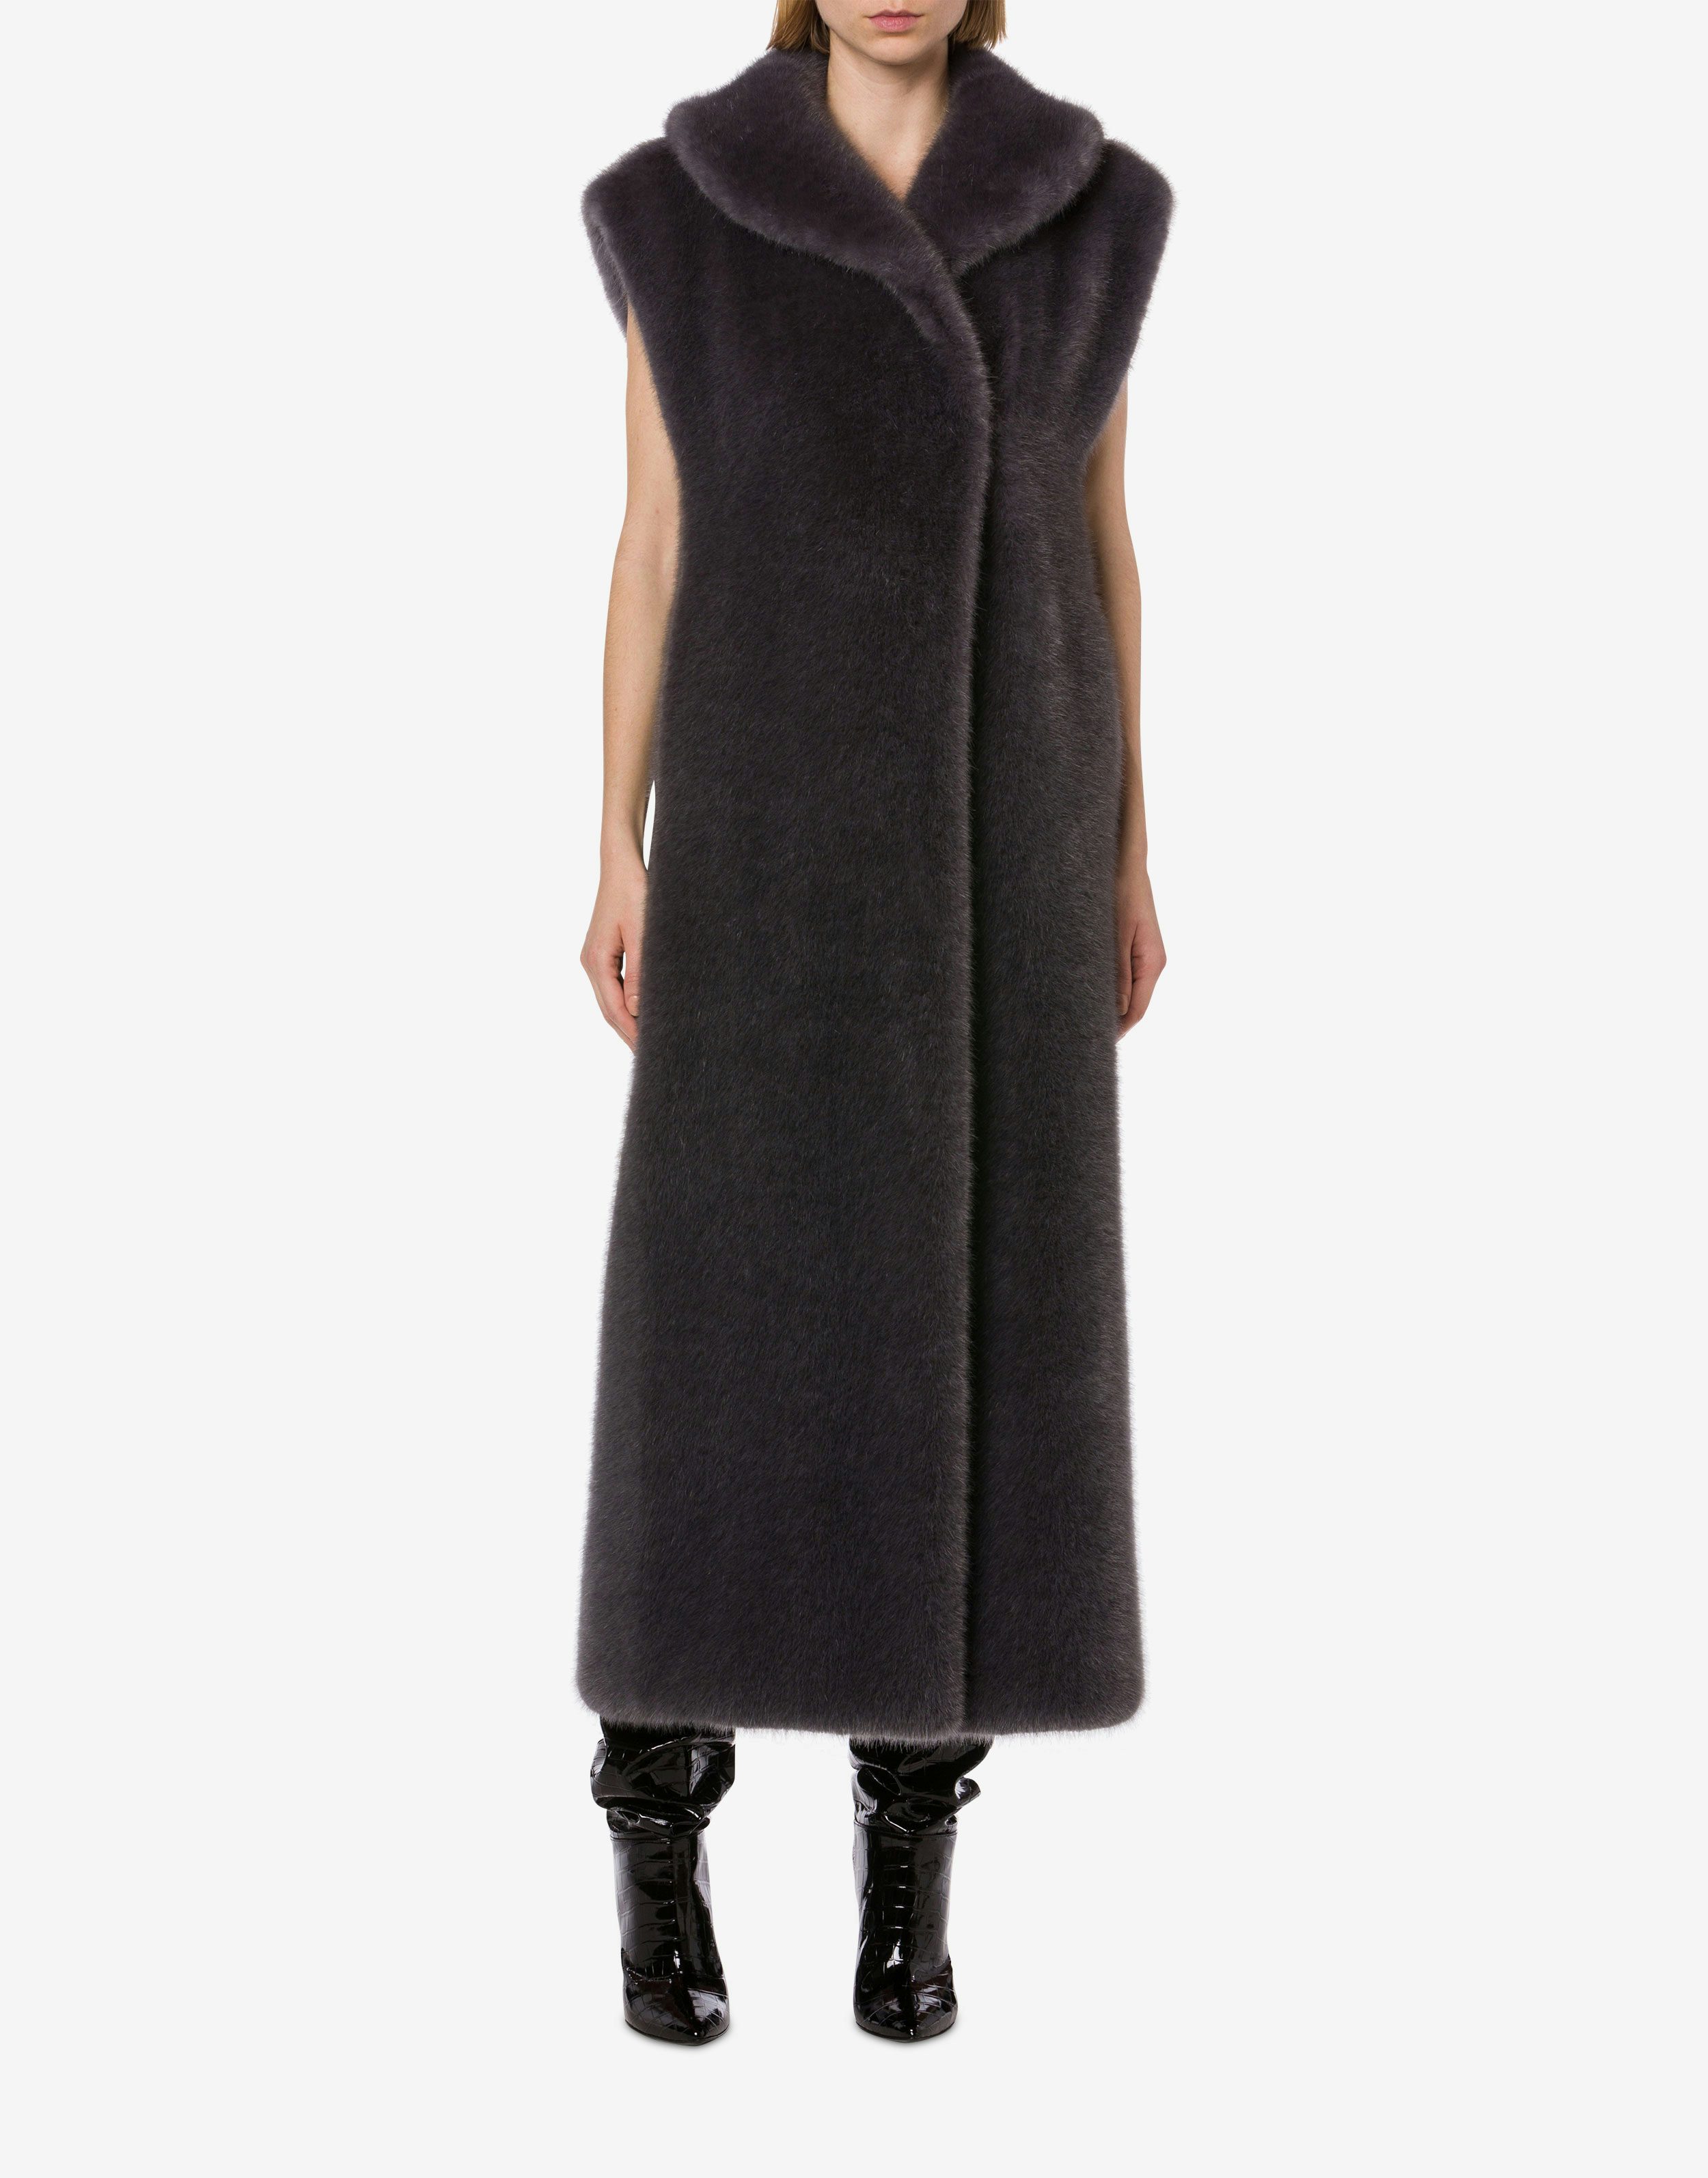 Extra-long gilet in soft fabric